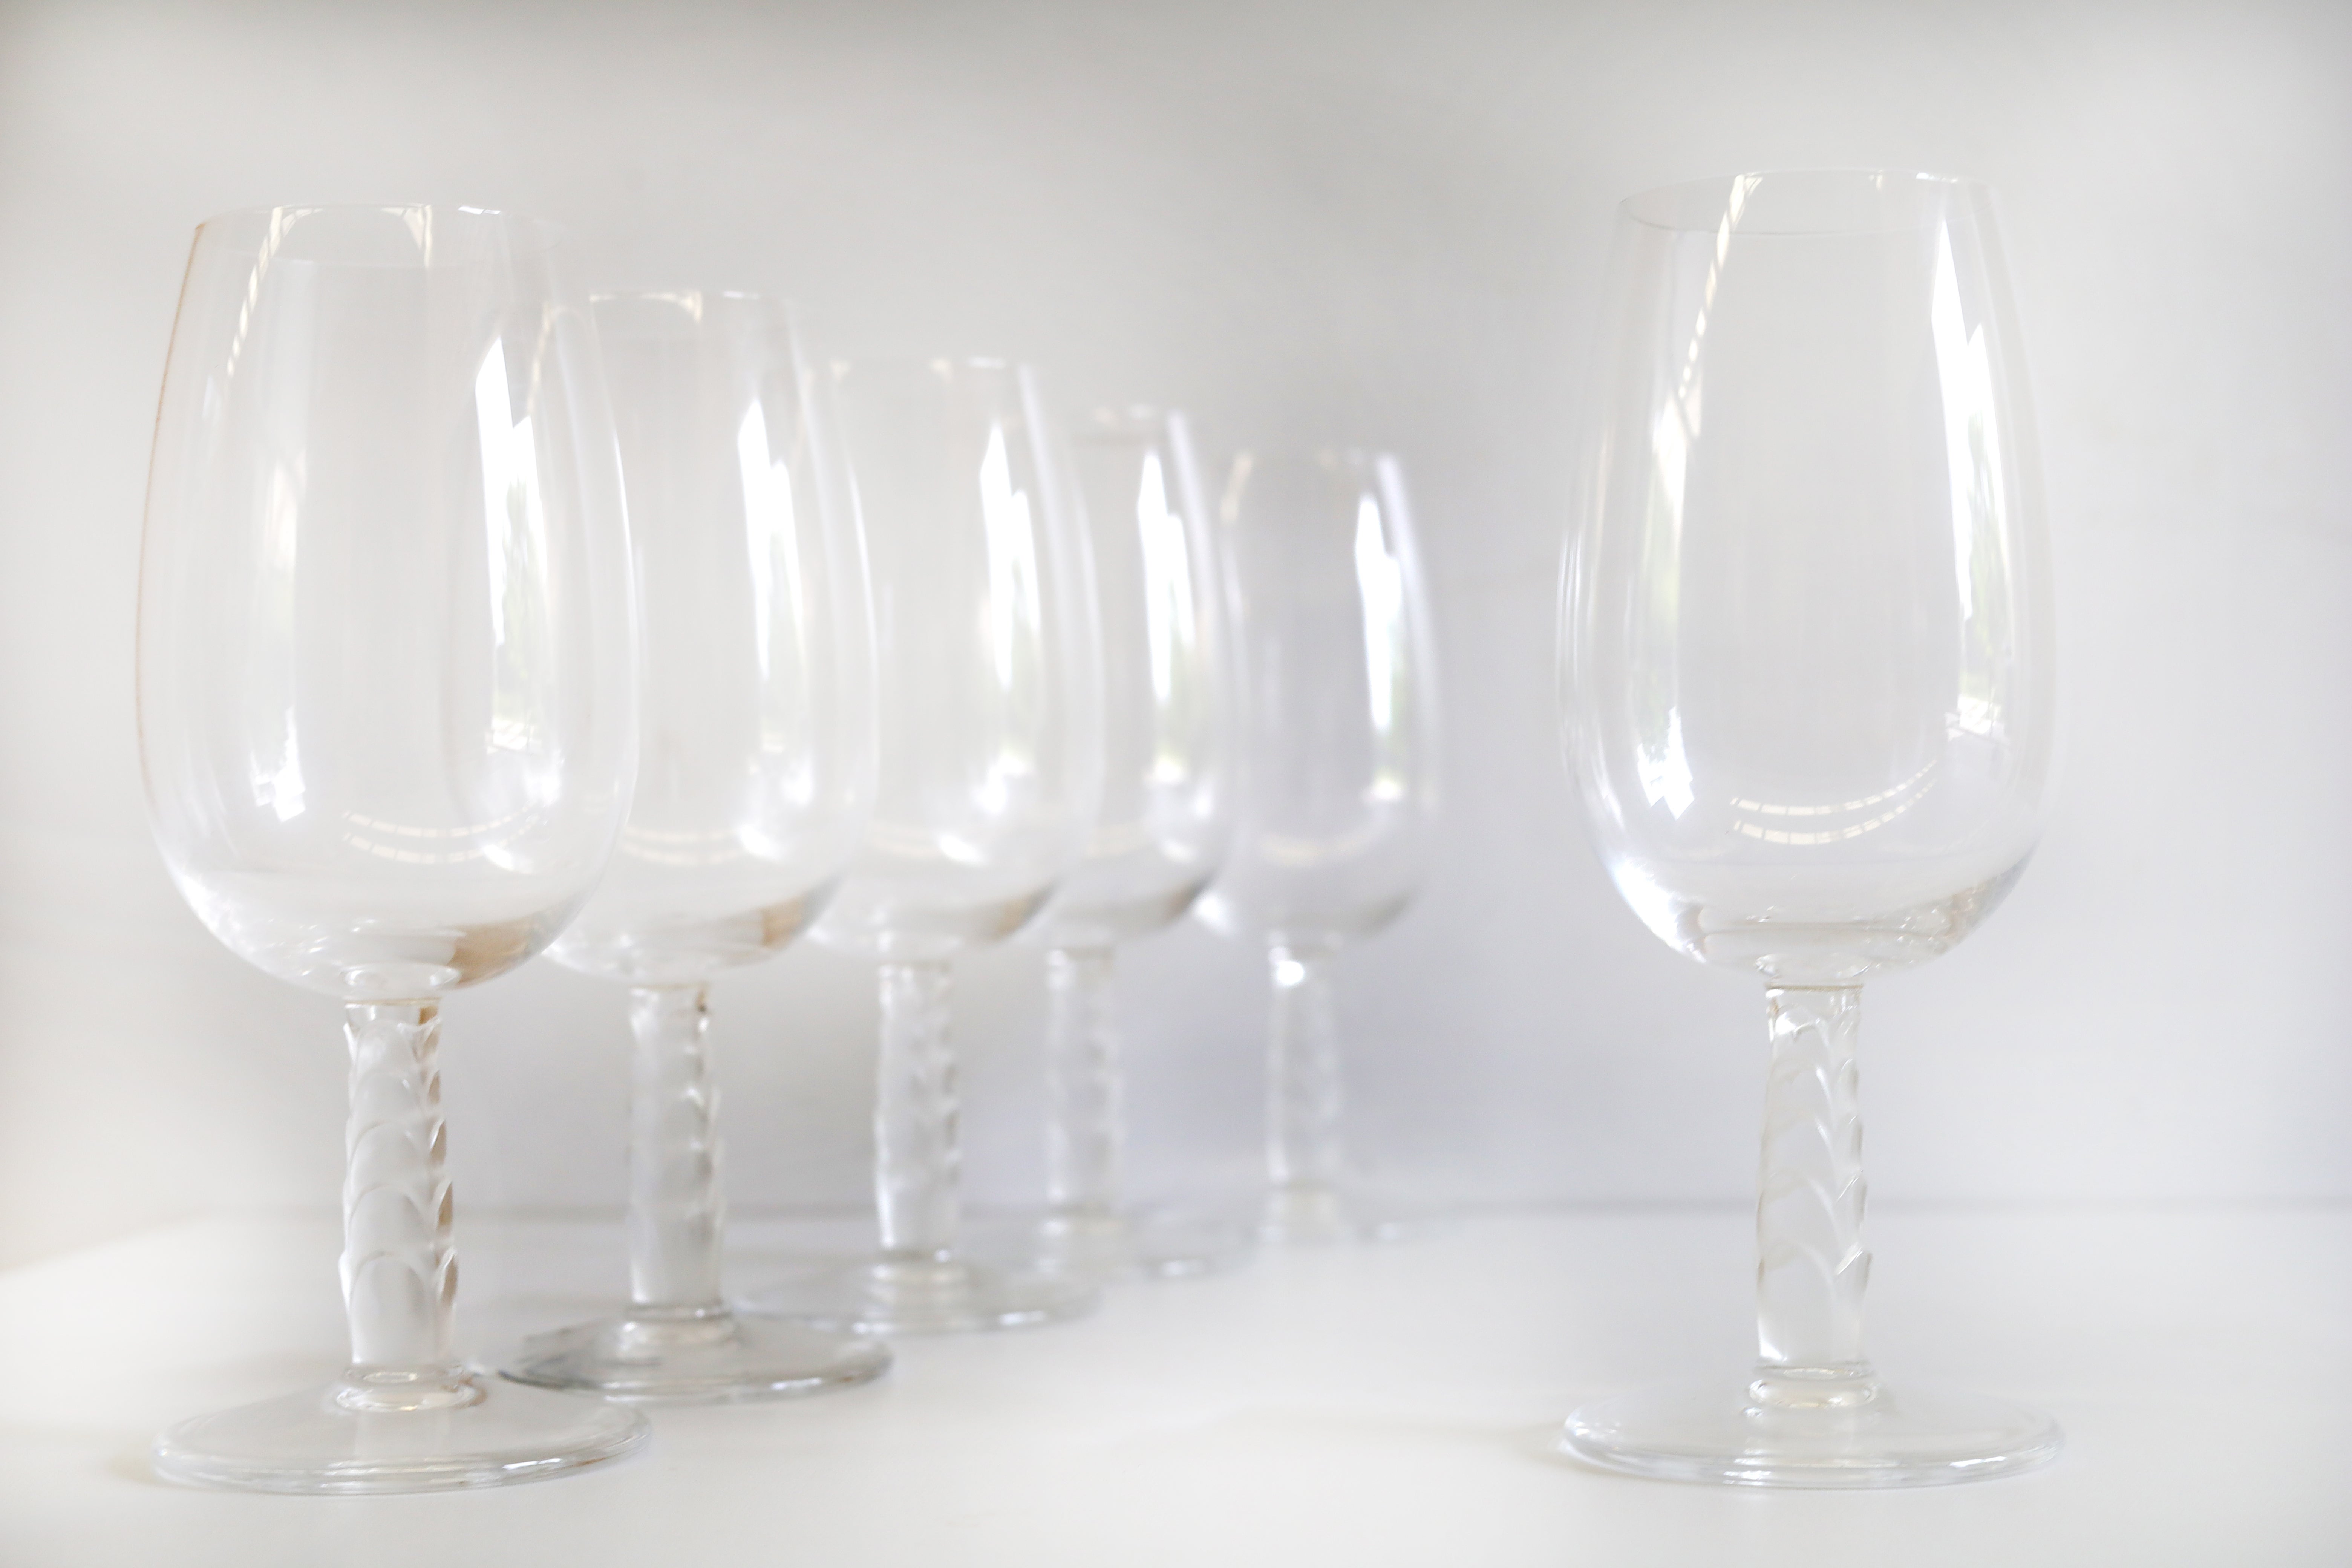 Never used. Original box. Signed. Set of 6 Lalique Kentia Crystal glasses.
Model out of production
Very elegant.